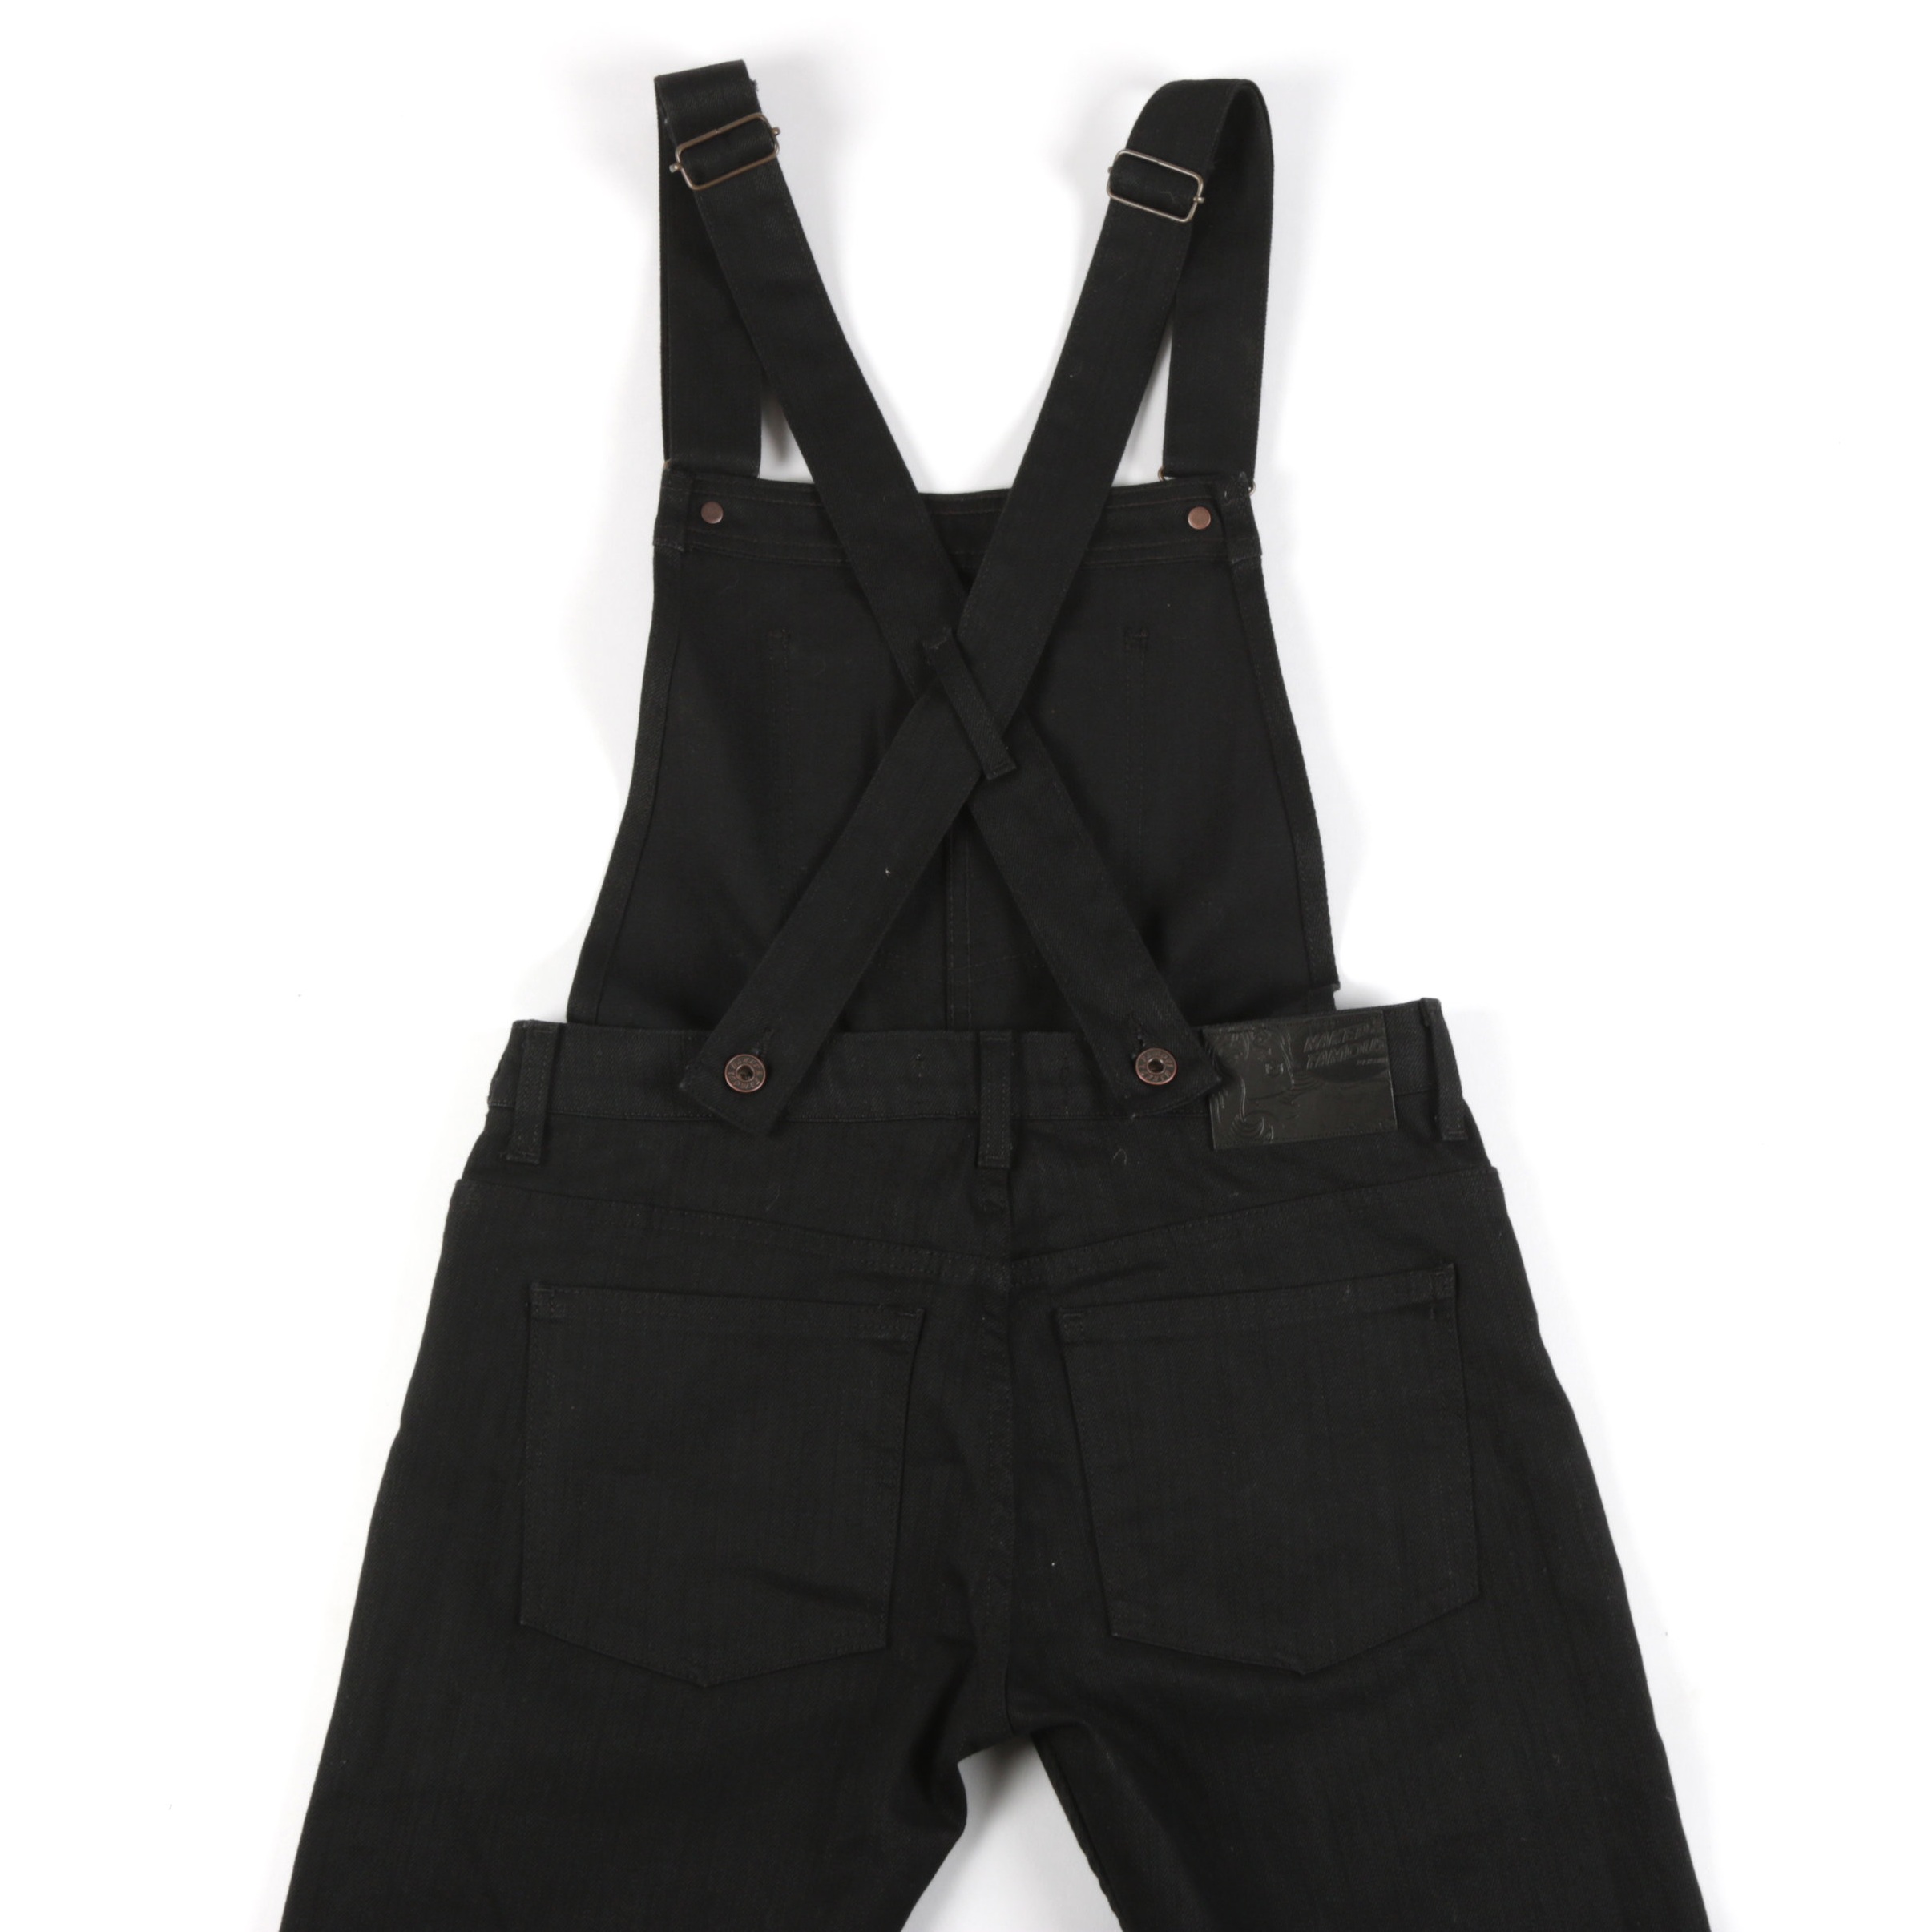  Women’s Overalls Black Power-Stretch Back View 